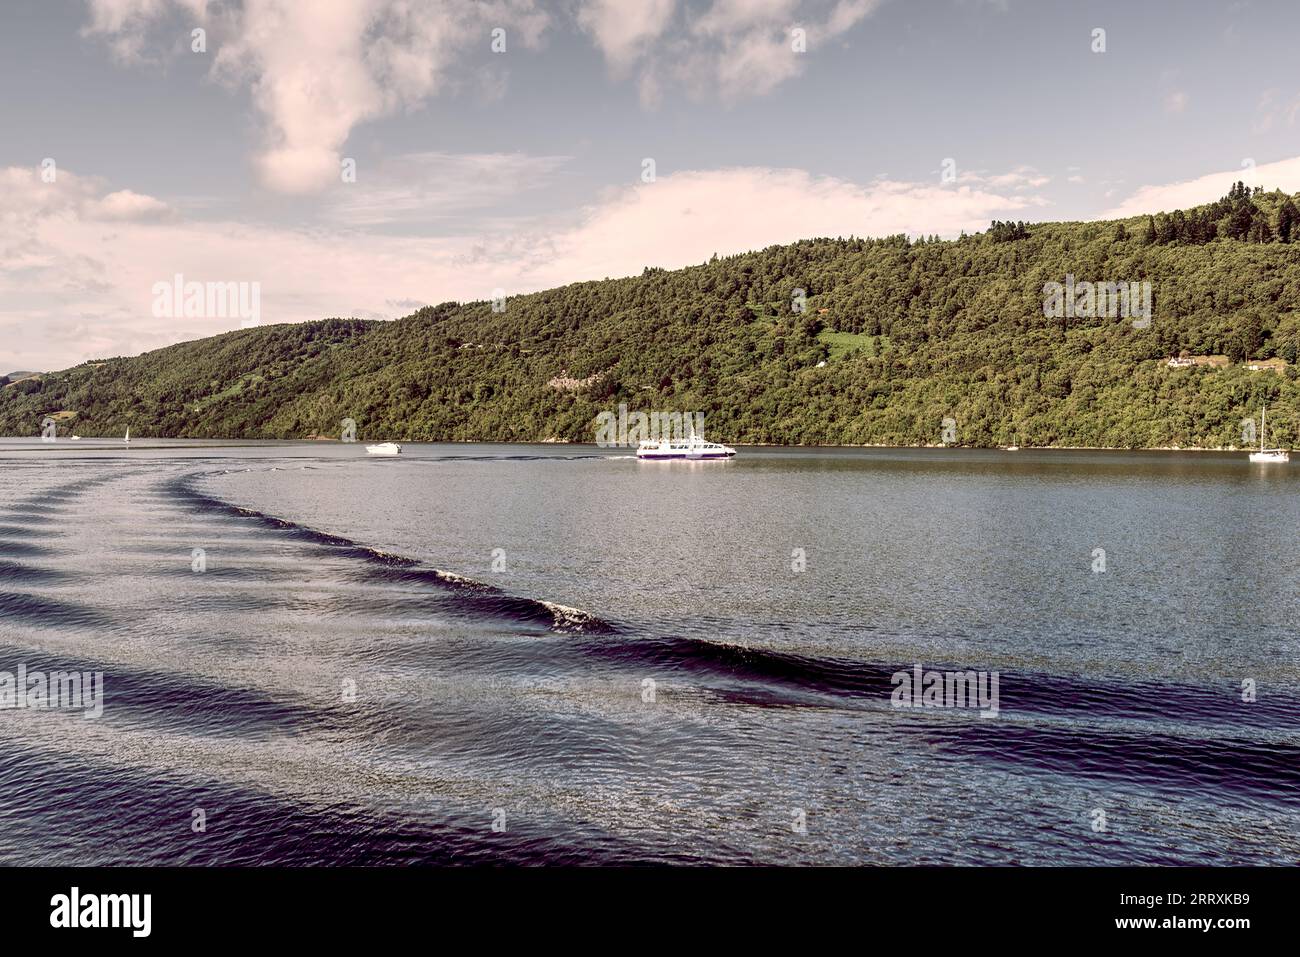 Echoes on the Loch: Nave passeggeri Making Waves on Loch Ness Foto Stock